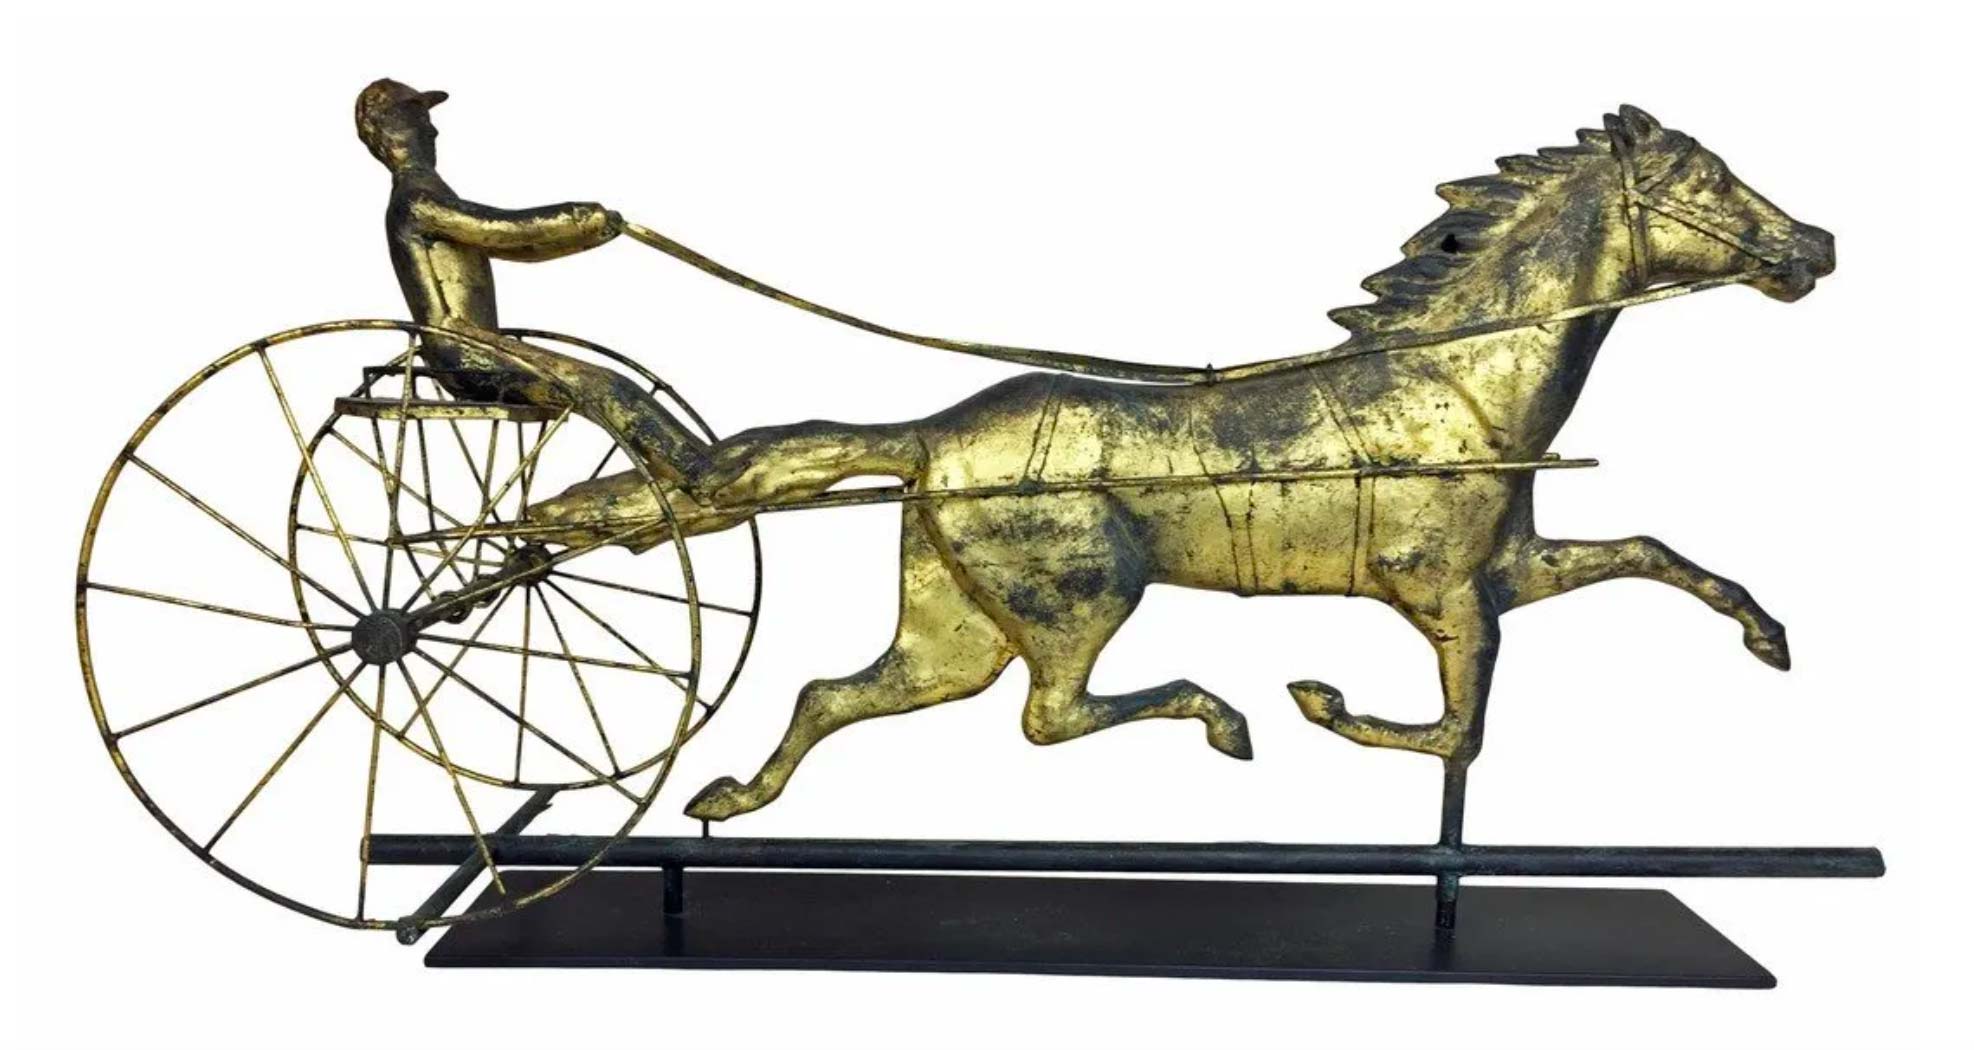 Trotter horse and sulky weathervane, 1880s, $8,000-$12,000